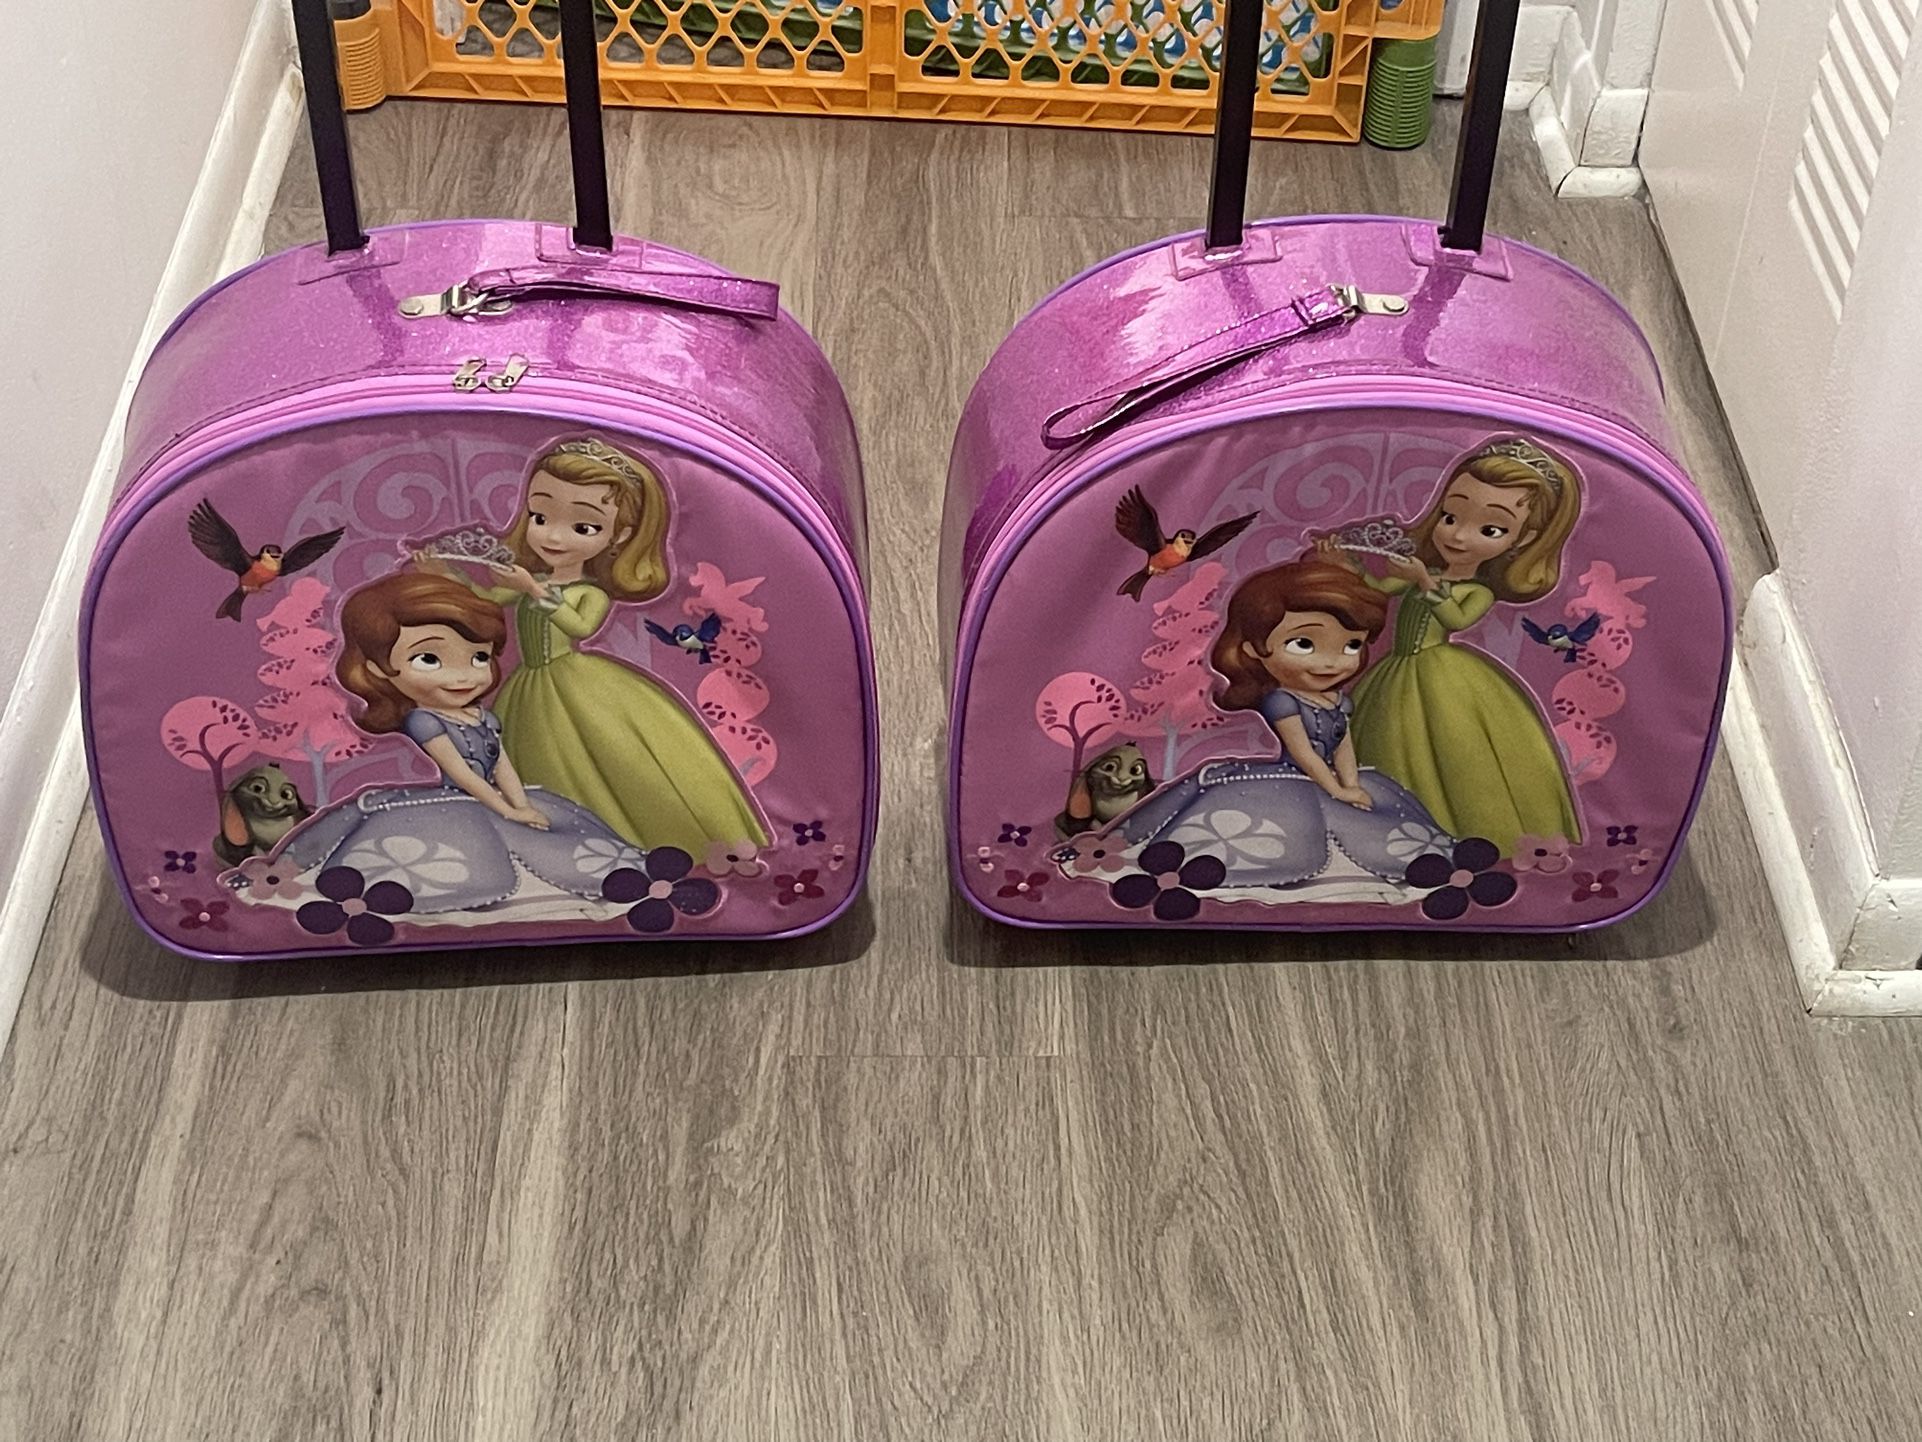 ( 2 ) Disney Store Princess Sofia and Amber Rolling Luggage